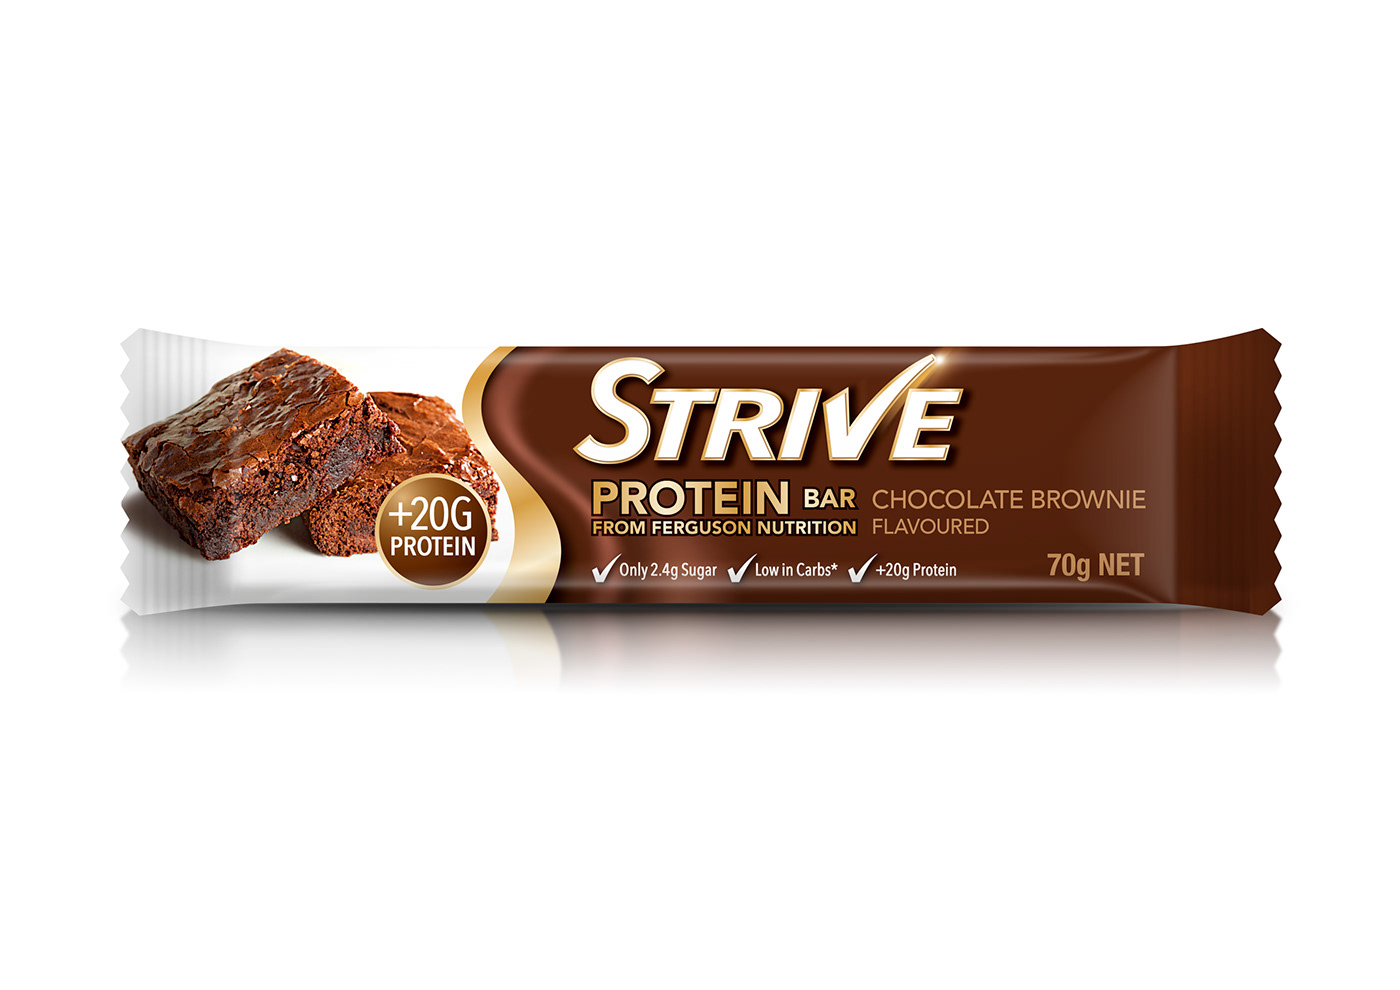 Strive Protein Bar Chocolate Brownie flavoured variant product render.